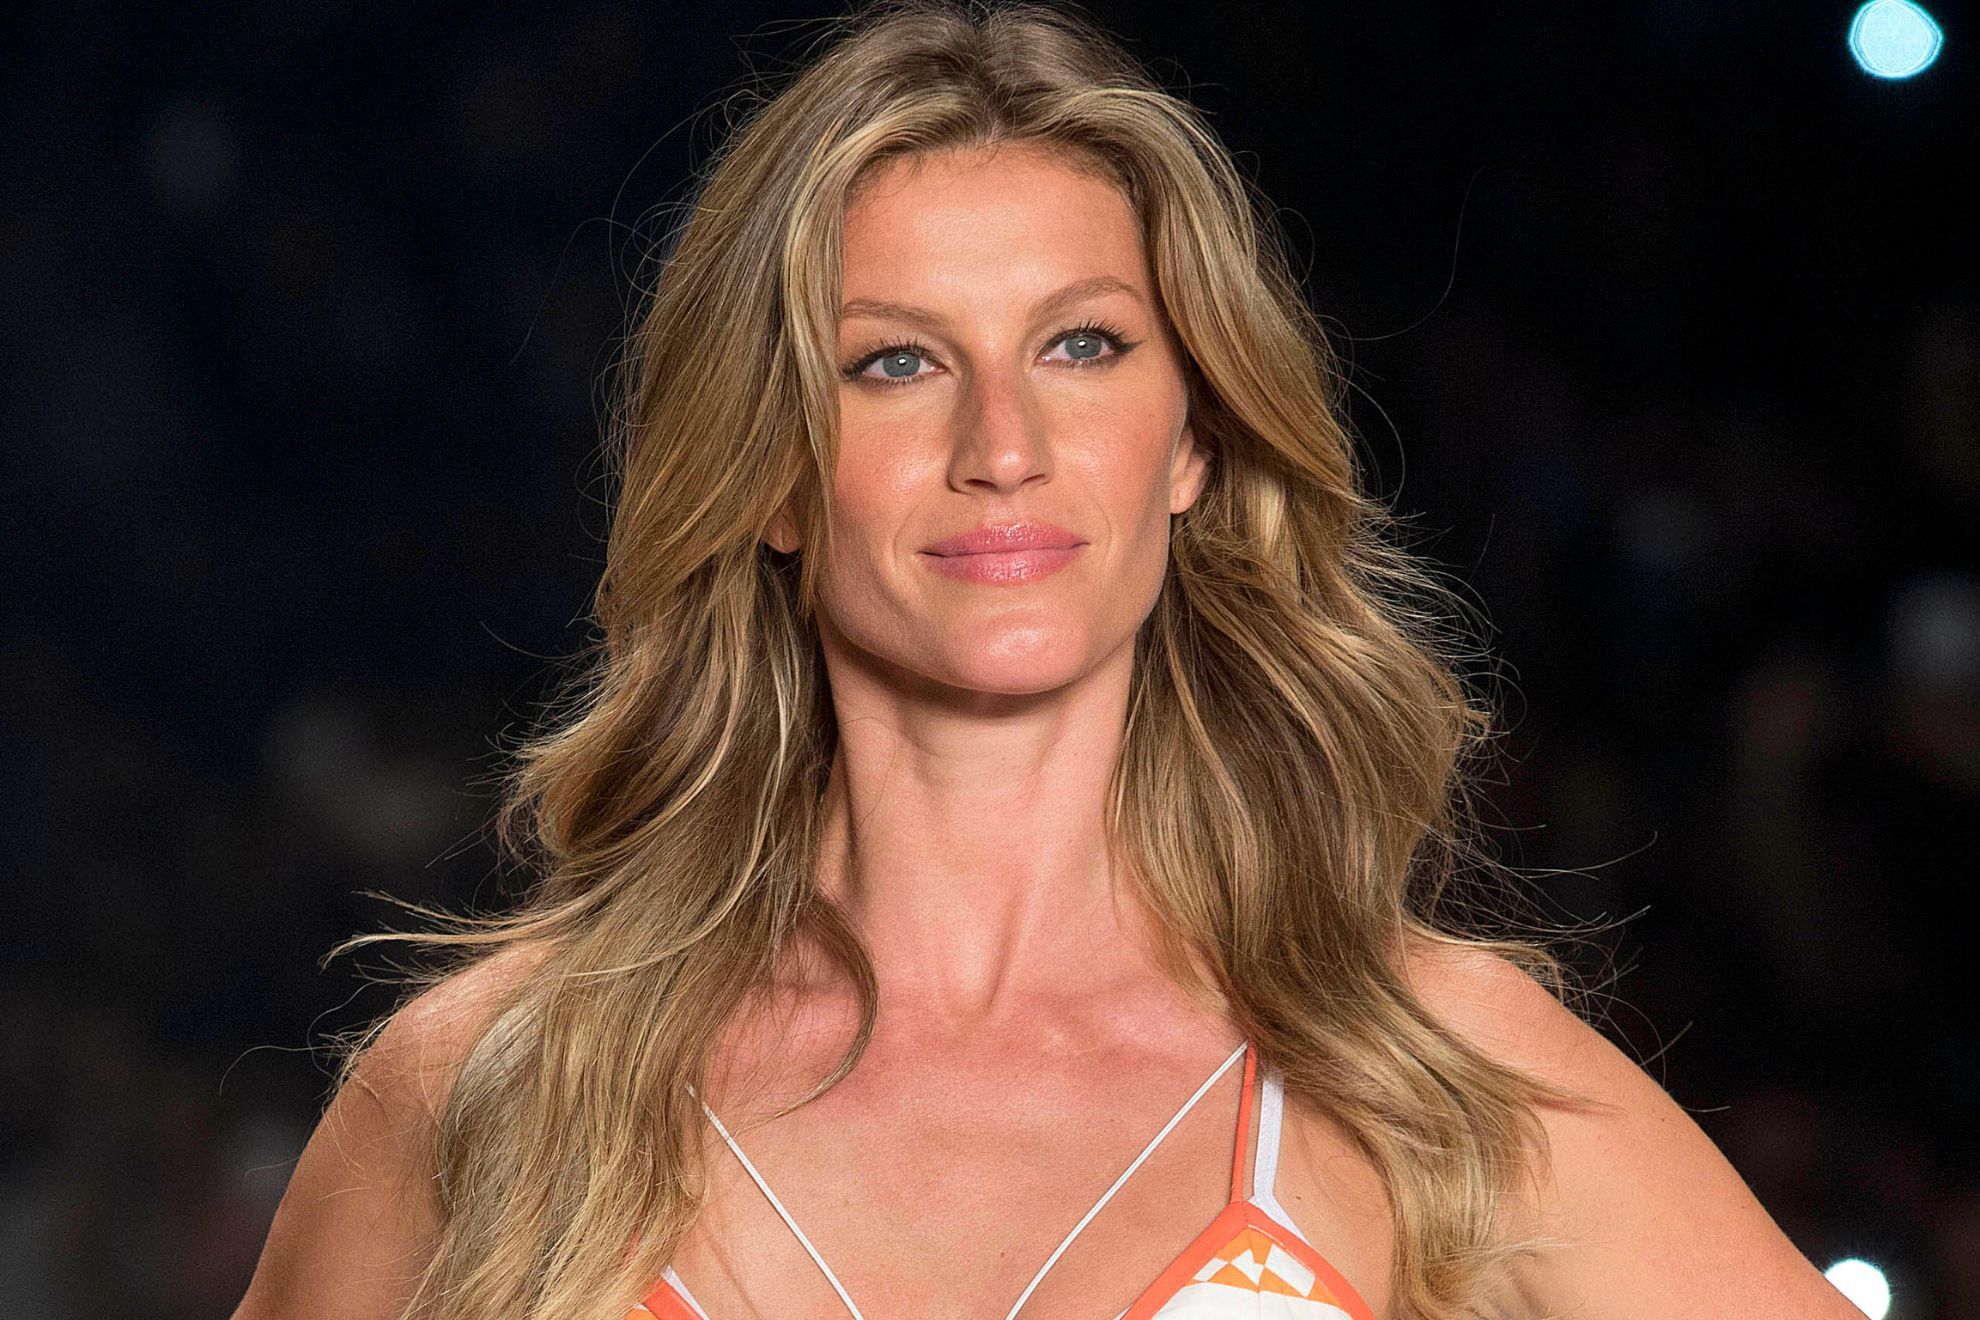 Gisele Bndchen is seen spending quality time with her daughter